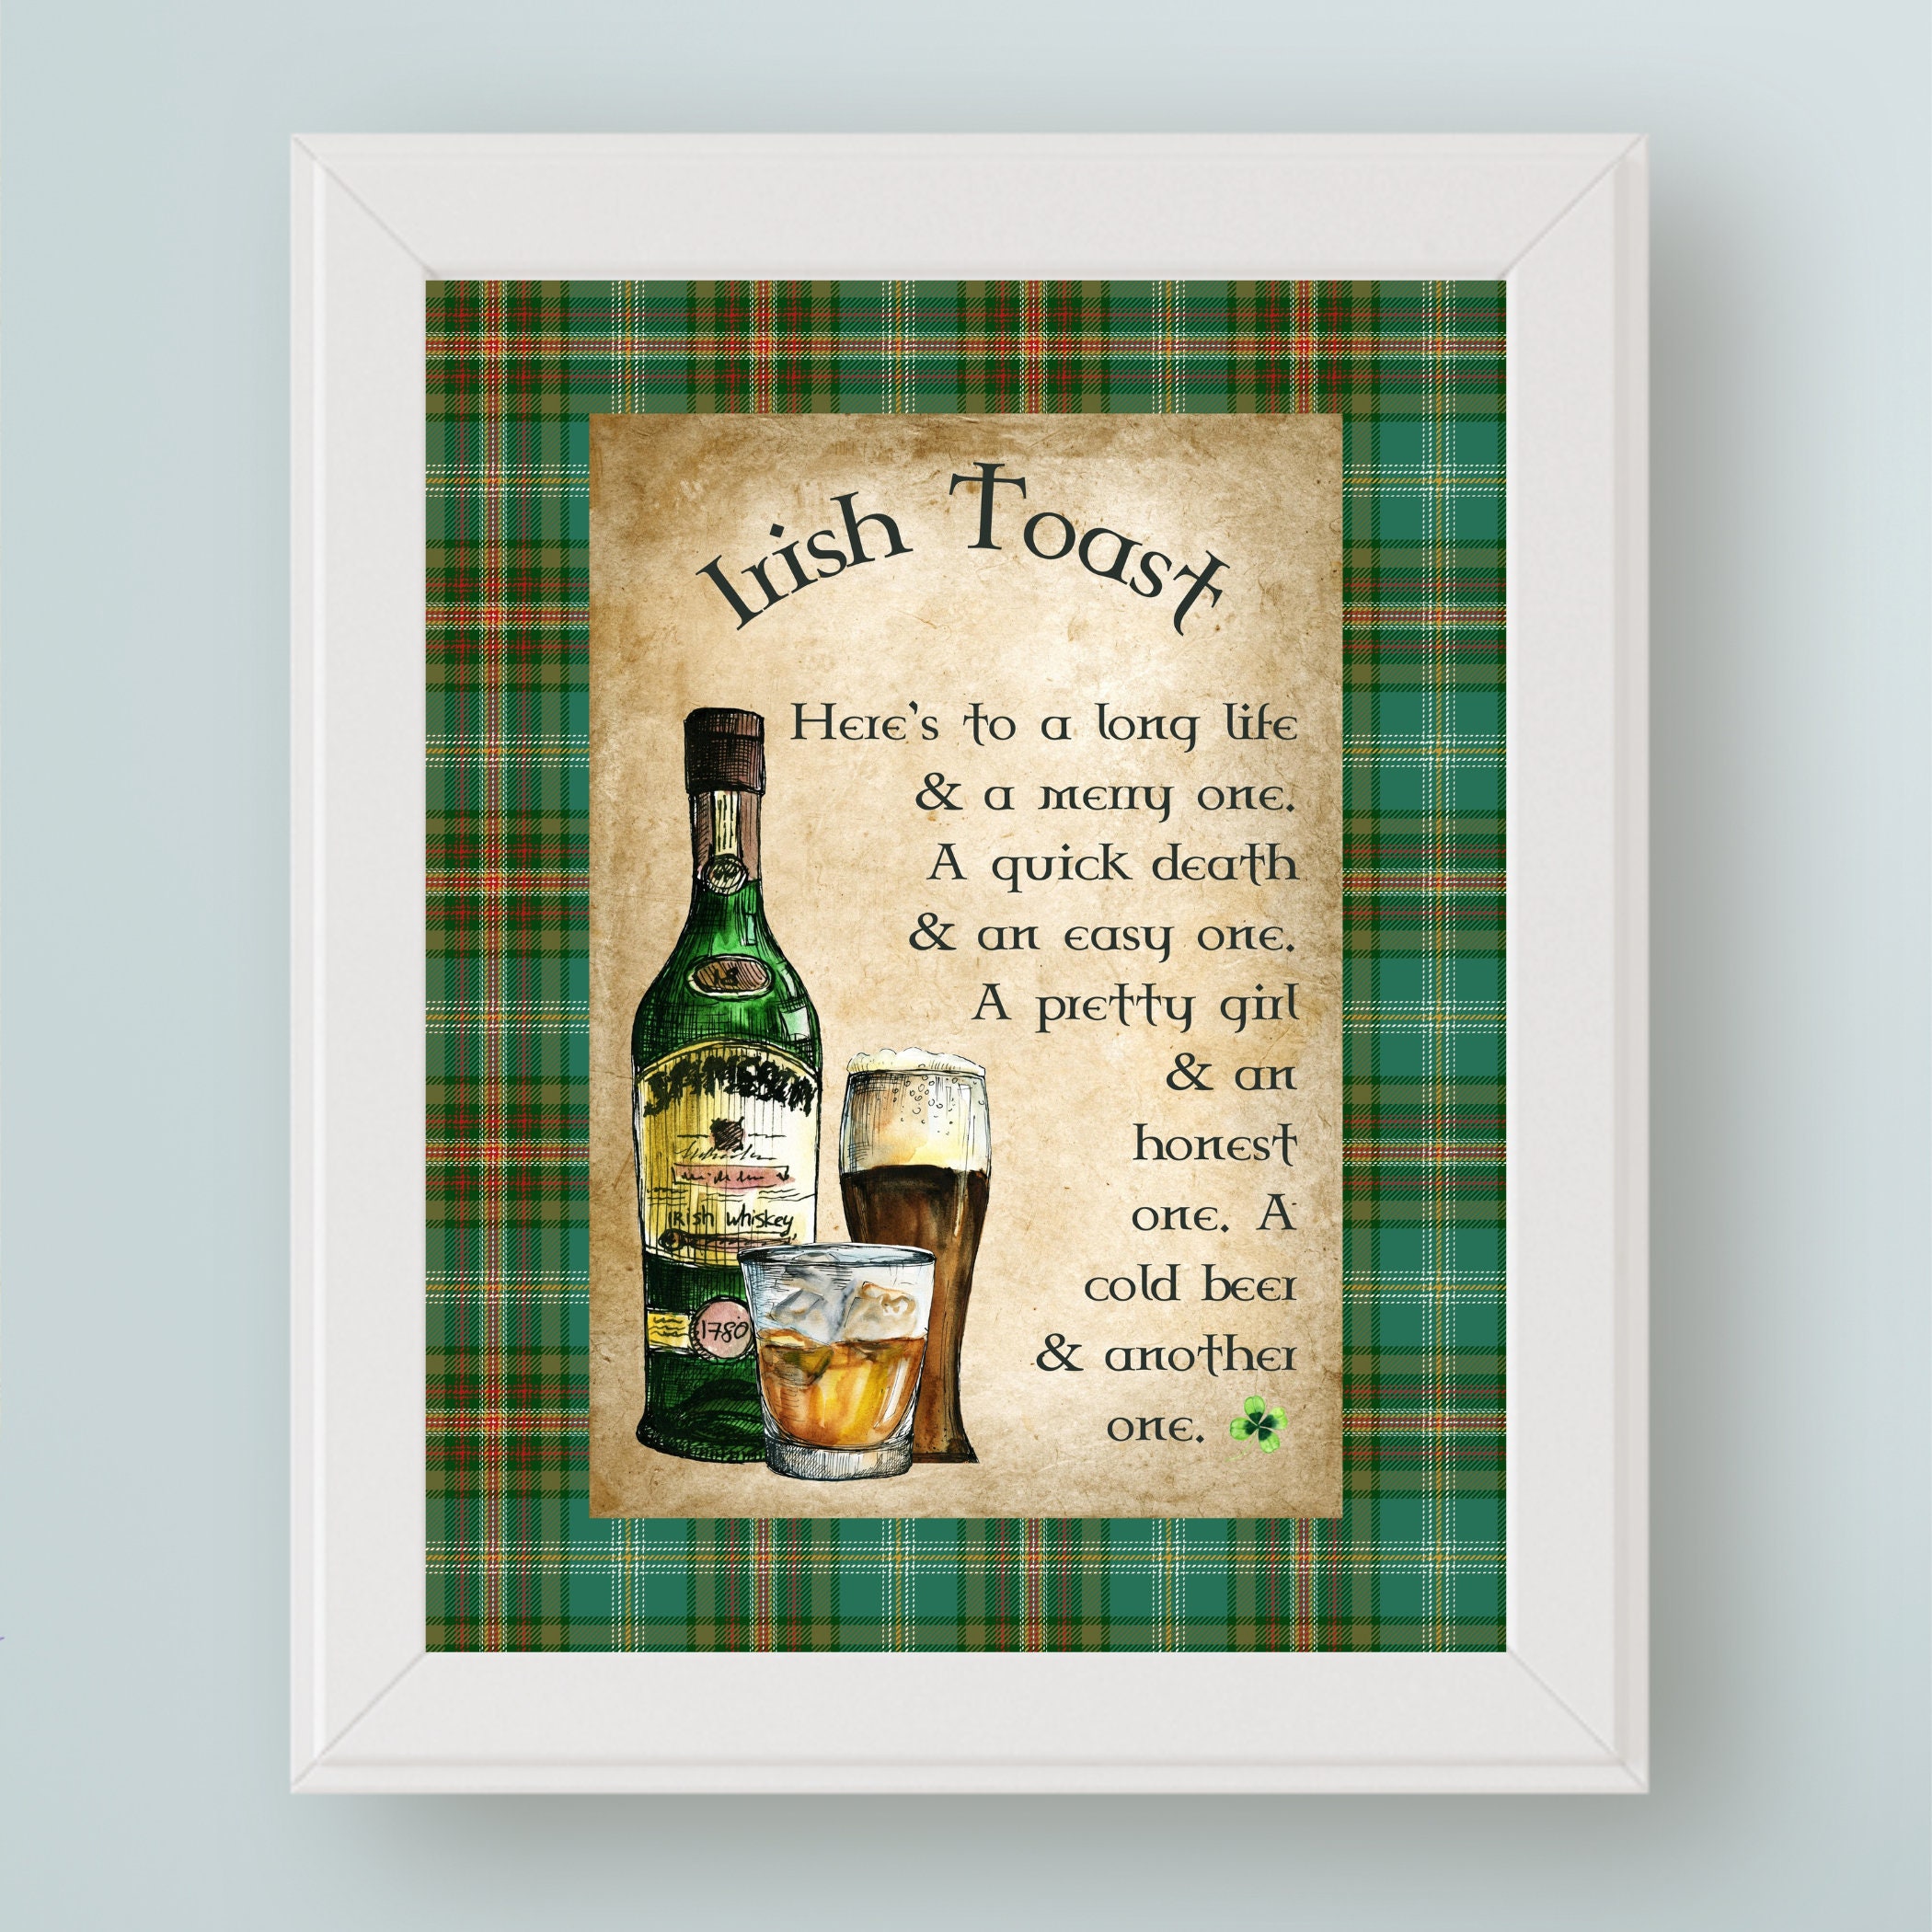 21 Year Girl Sex Old Manxn Video - Irish Art Print Drinking Toast: Here's to a Long Life - Etsy